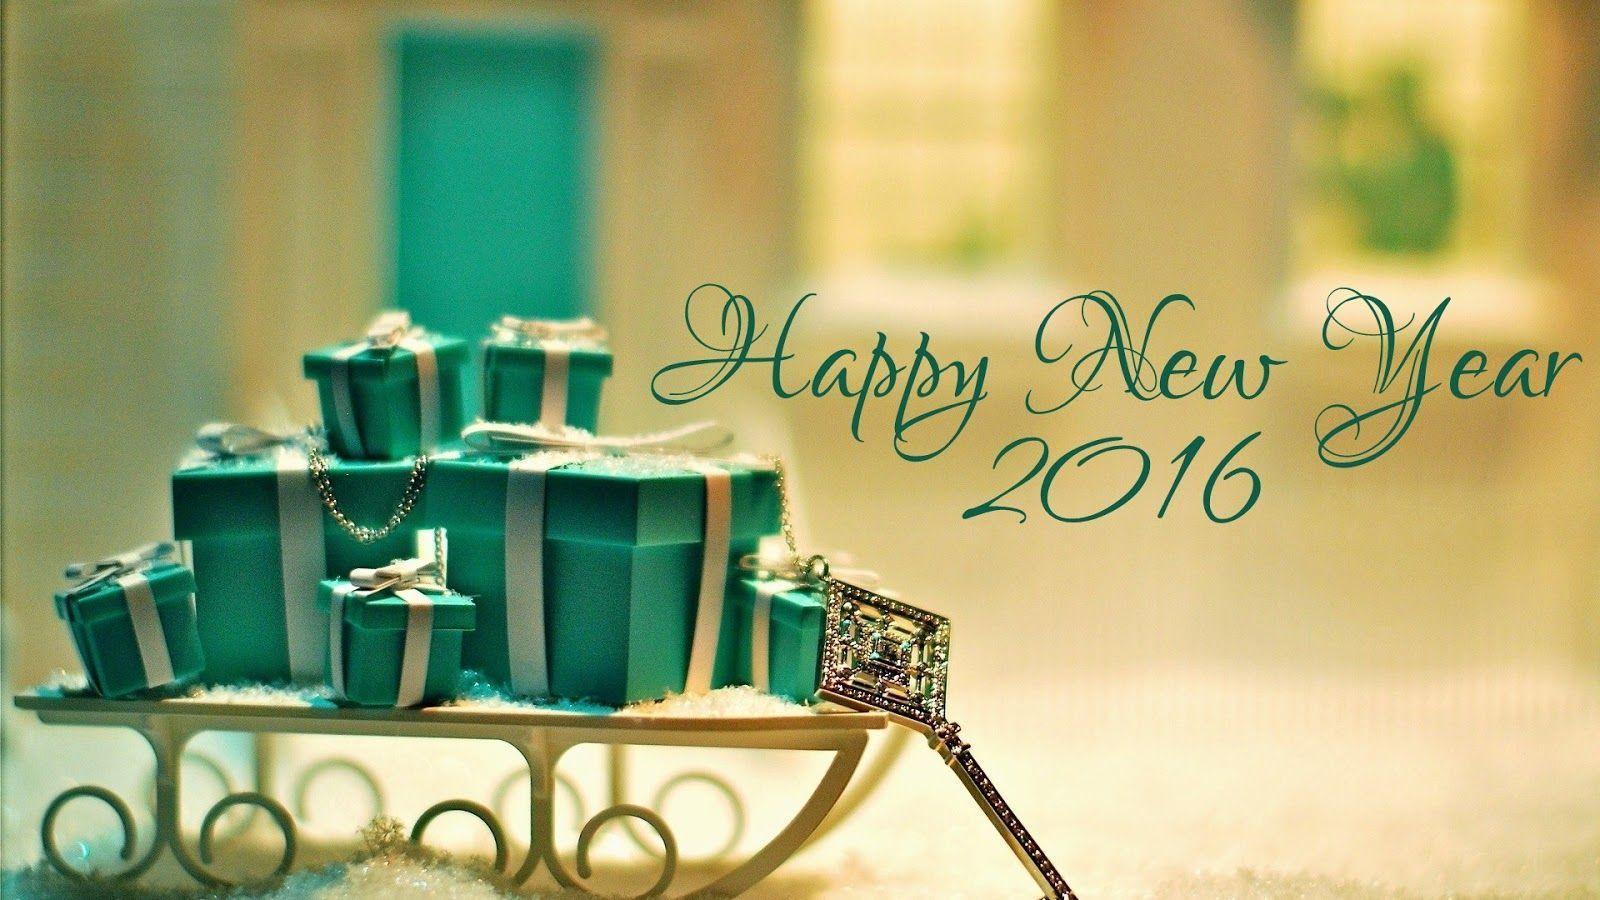 Happy New Year 2016 Wishes Wallpaper, Image, Picture